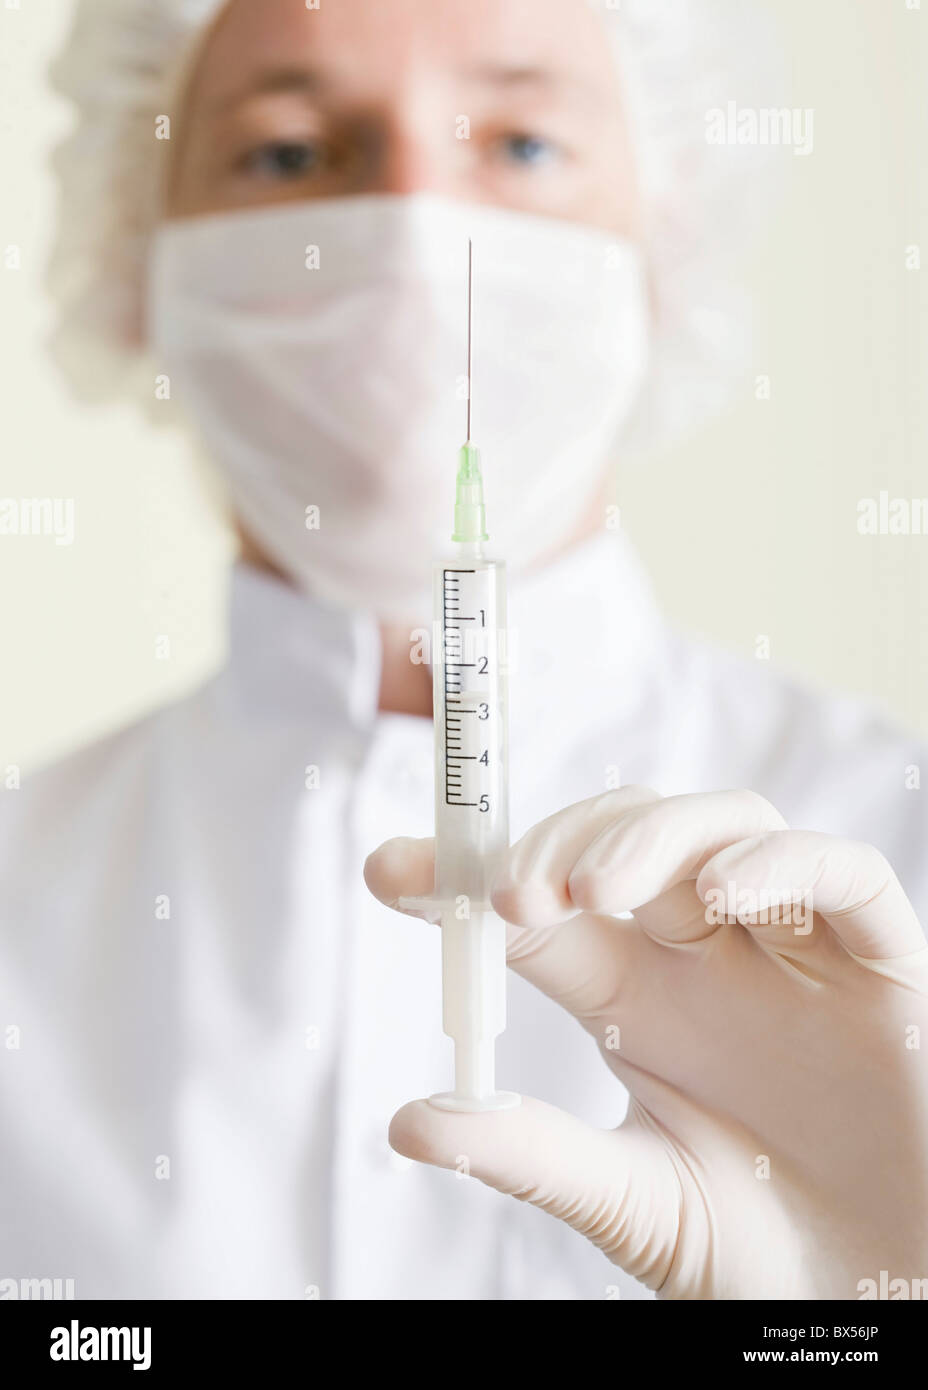 Injection Stock Photo